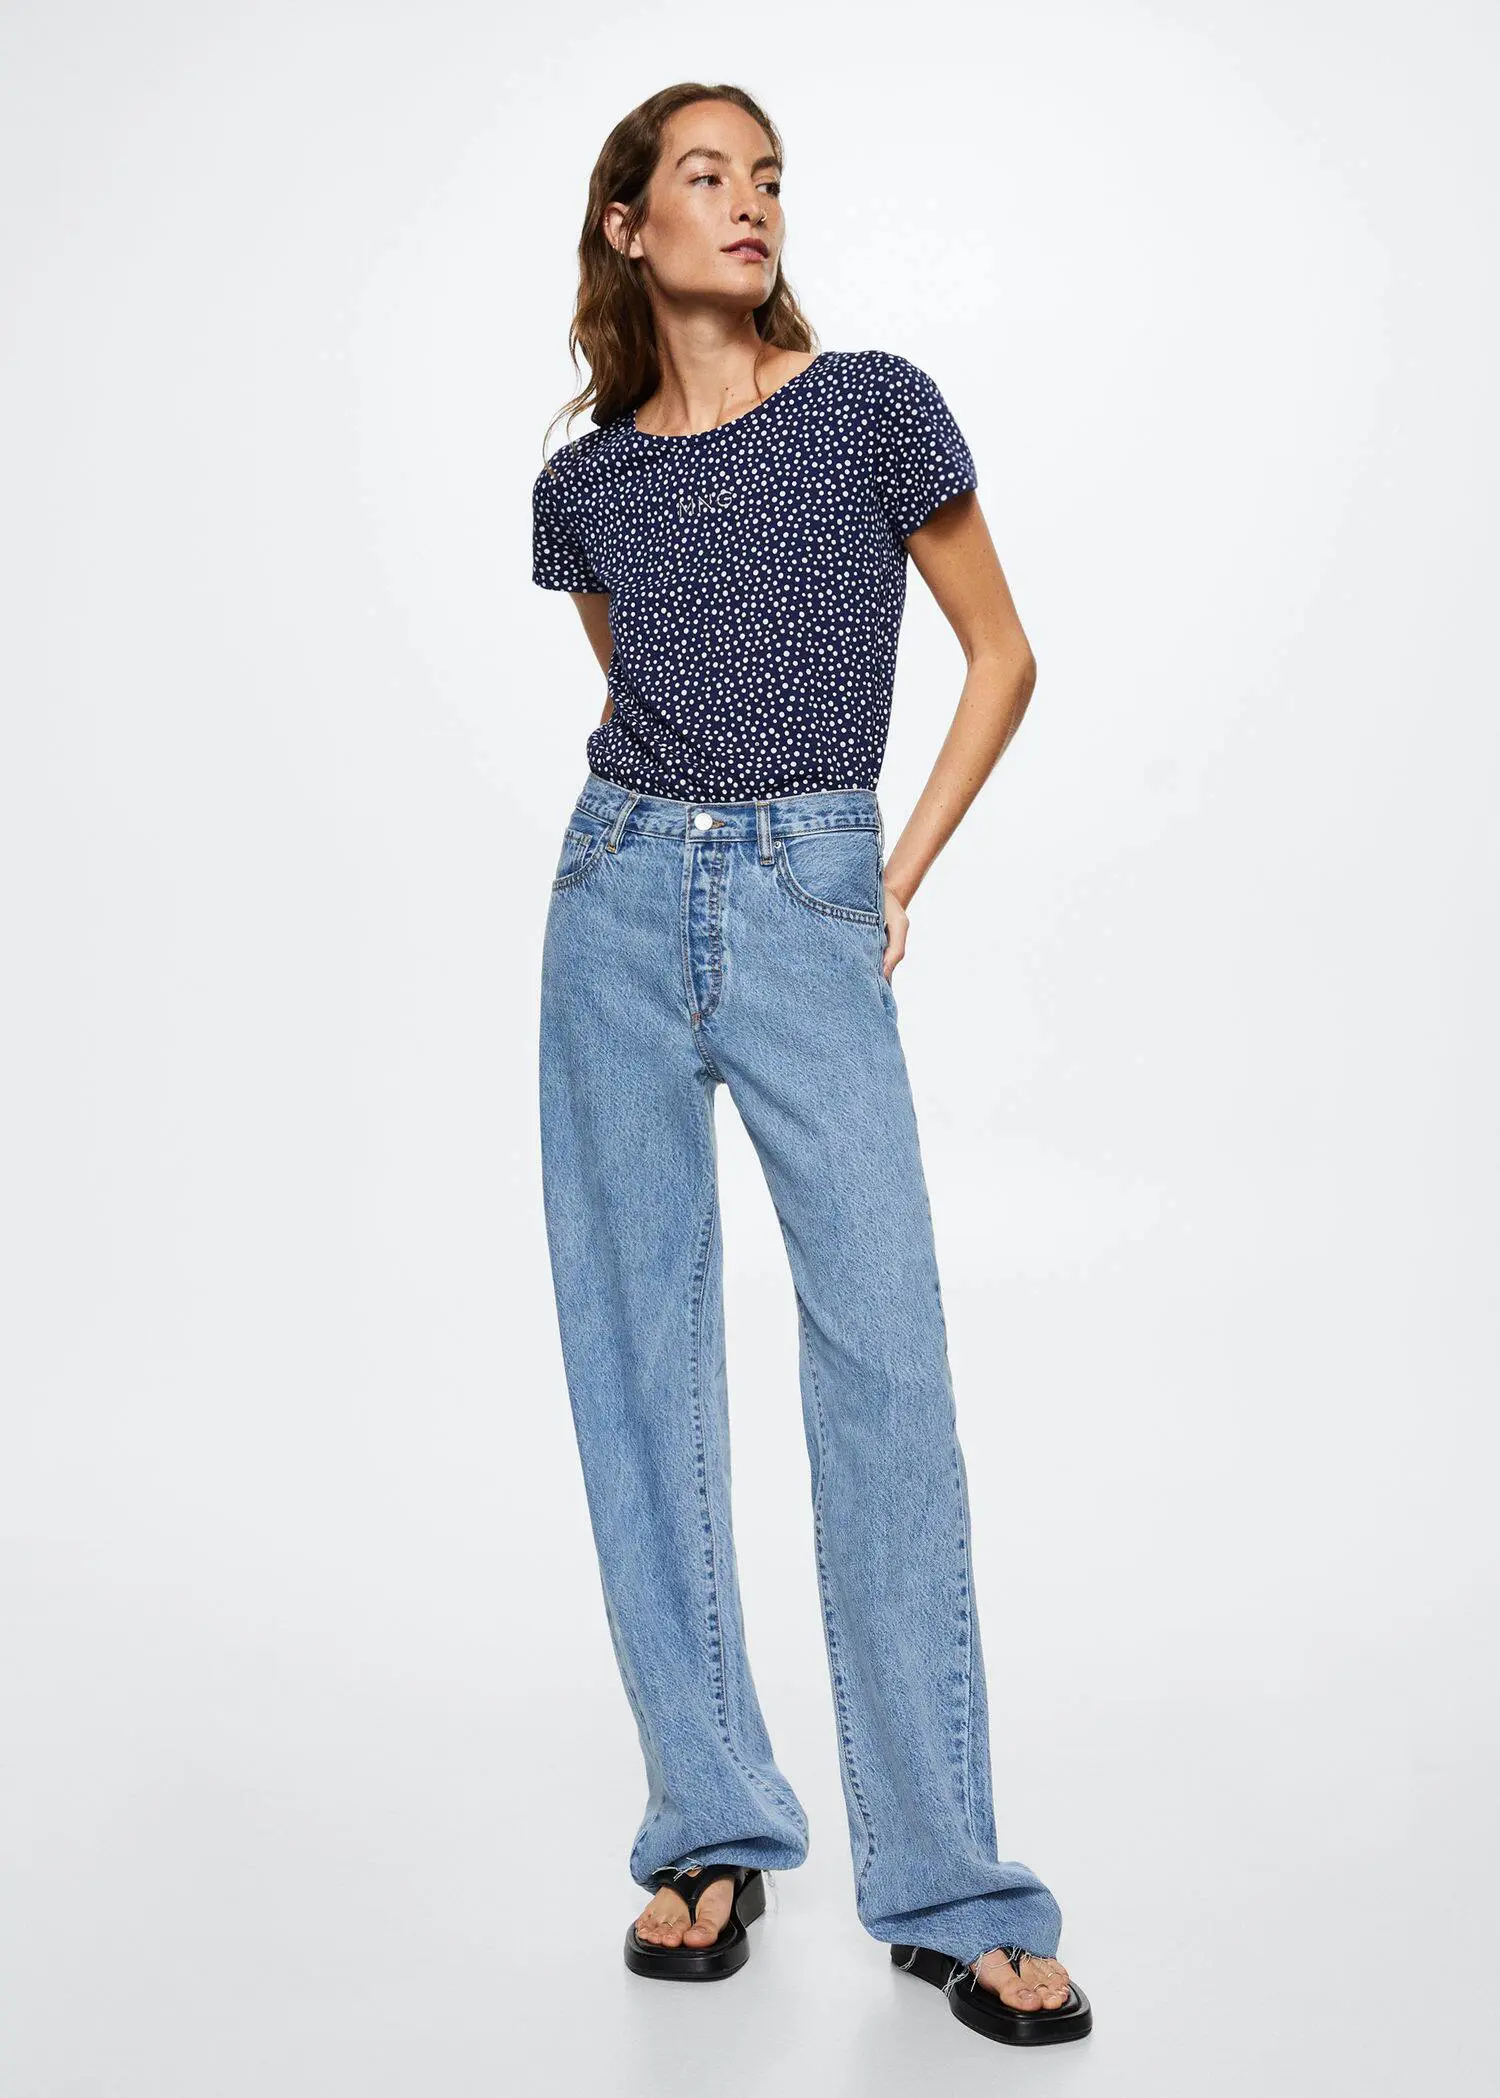 Mango Printed cotton-blend T-shirt. a woman in a blue shirt and jeans. 